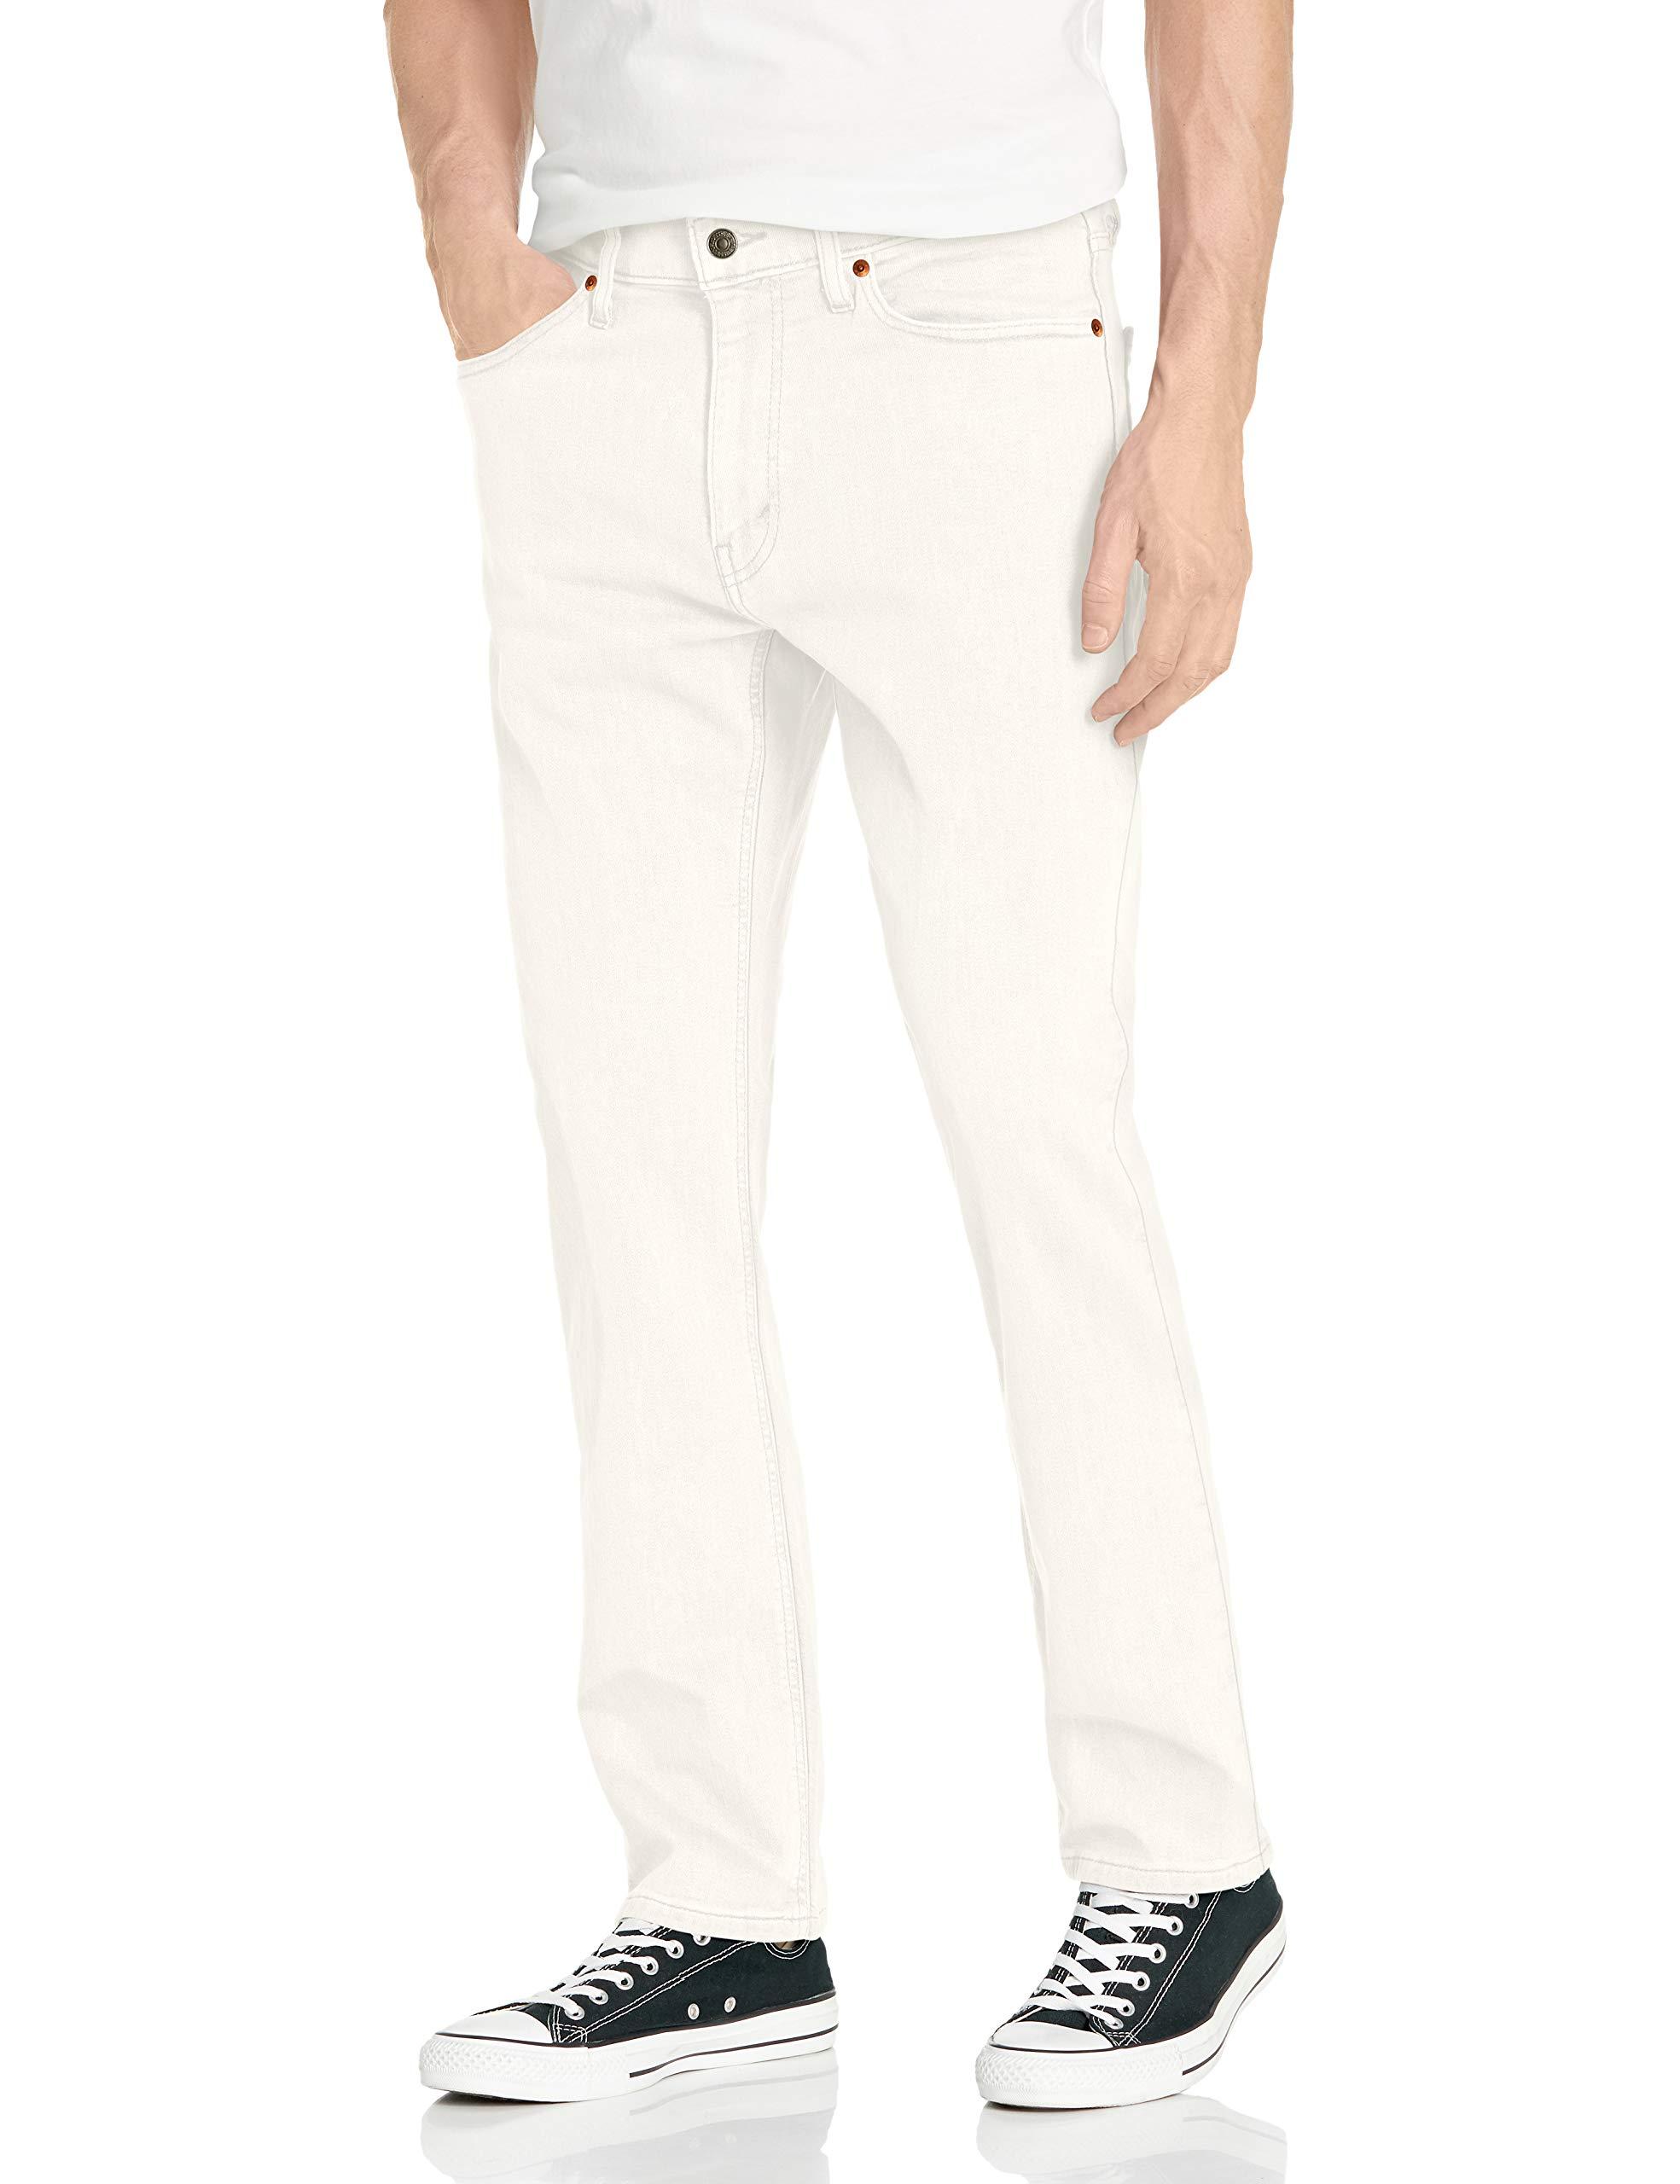 Levi's 541 Athletic-fit Jean in White for Men - Save 4% - Lyst